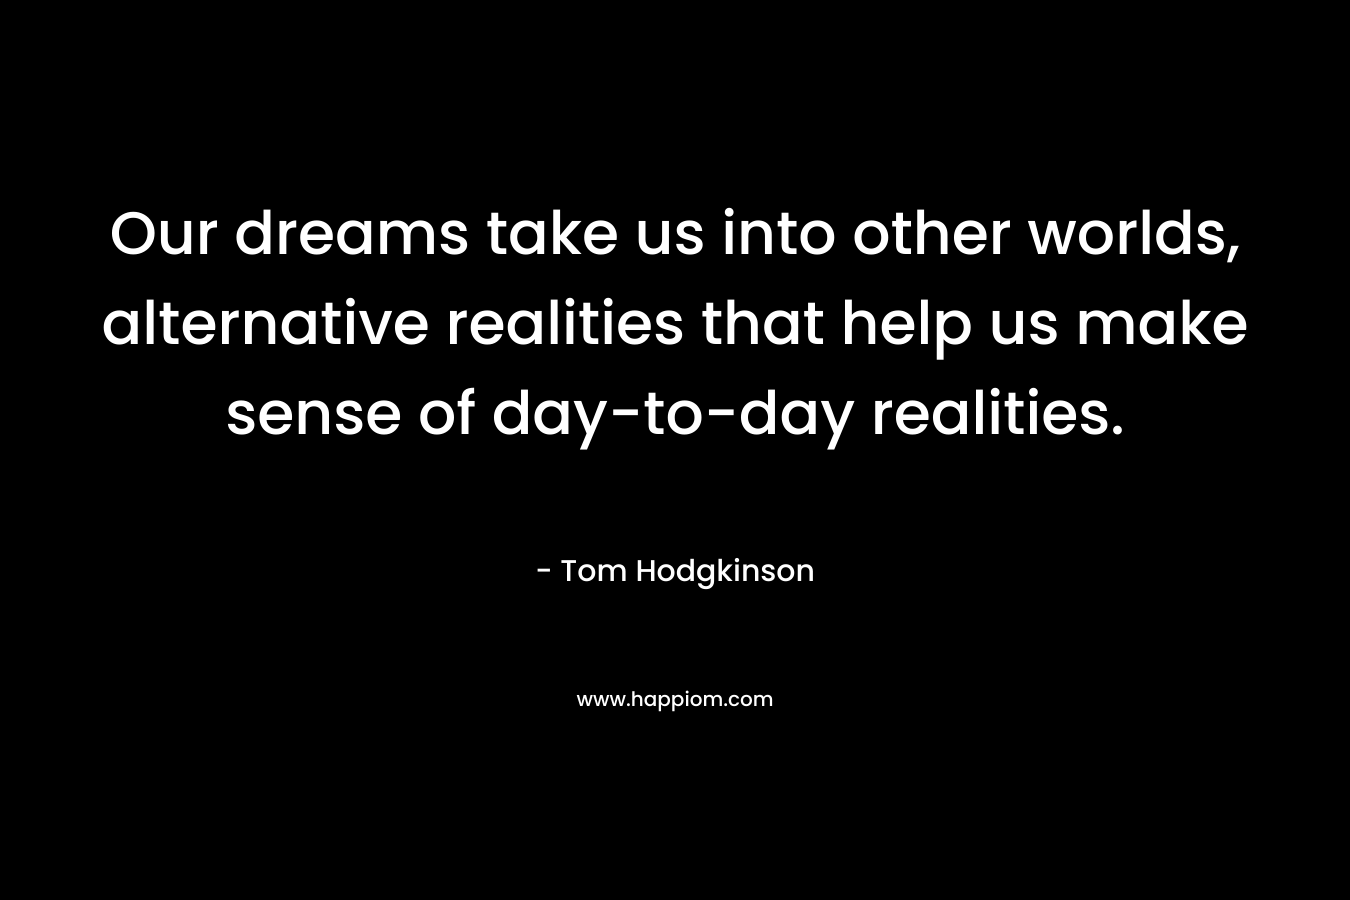 Our dreams take us into other worlds, alternative realities that help us make sense of day-to-day realities.